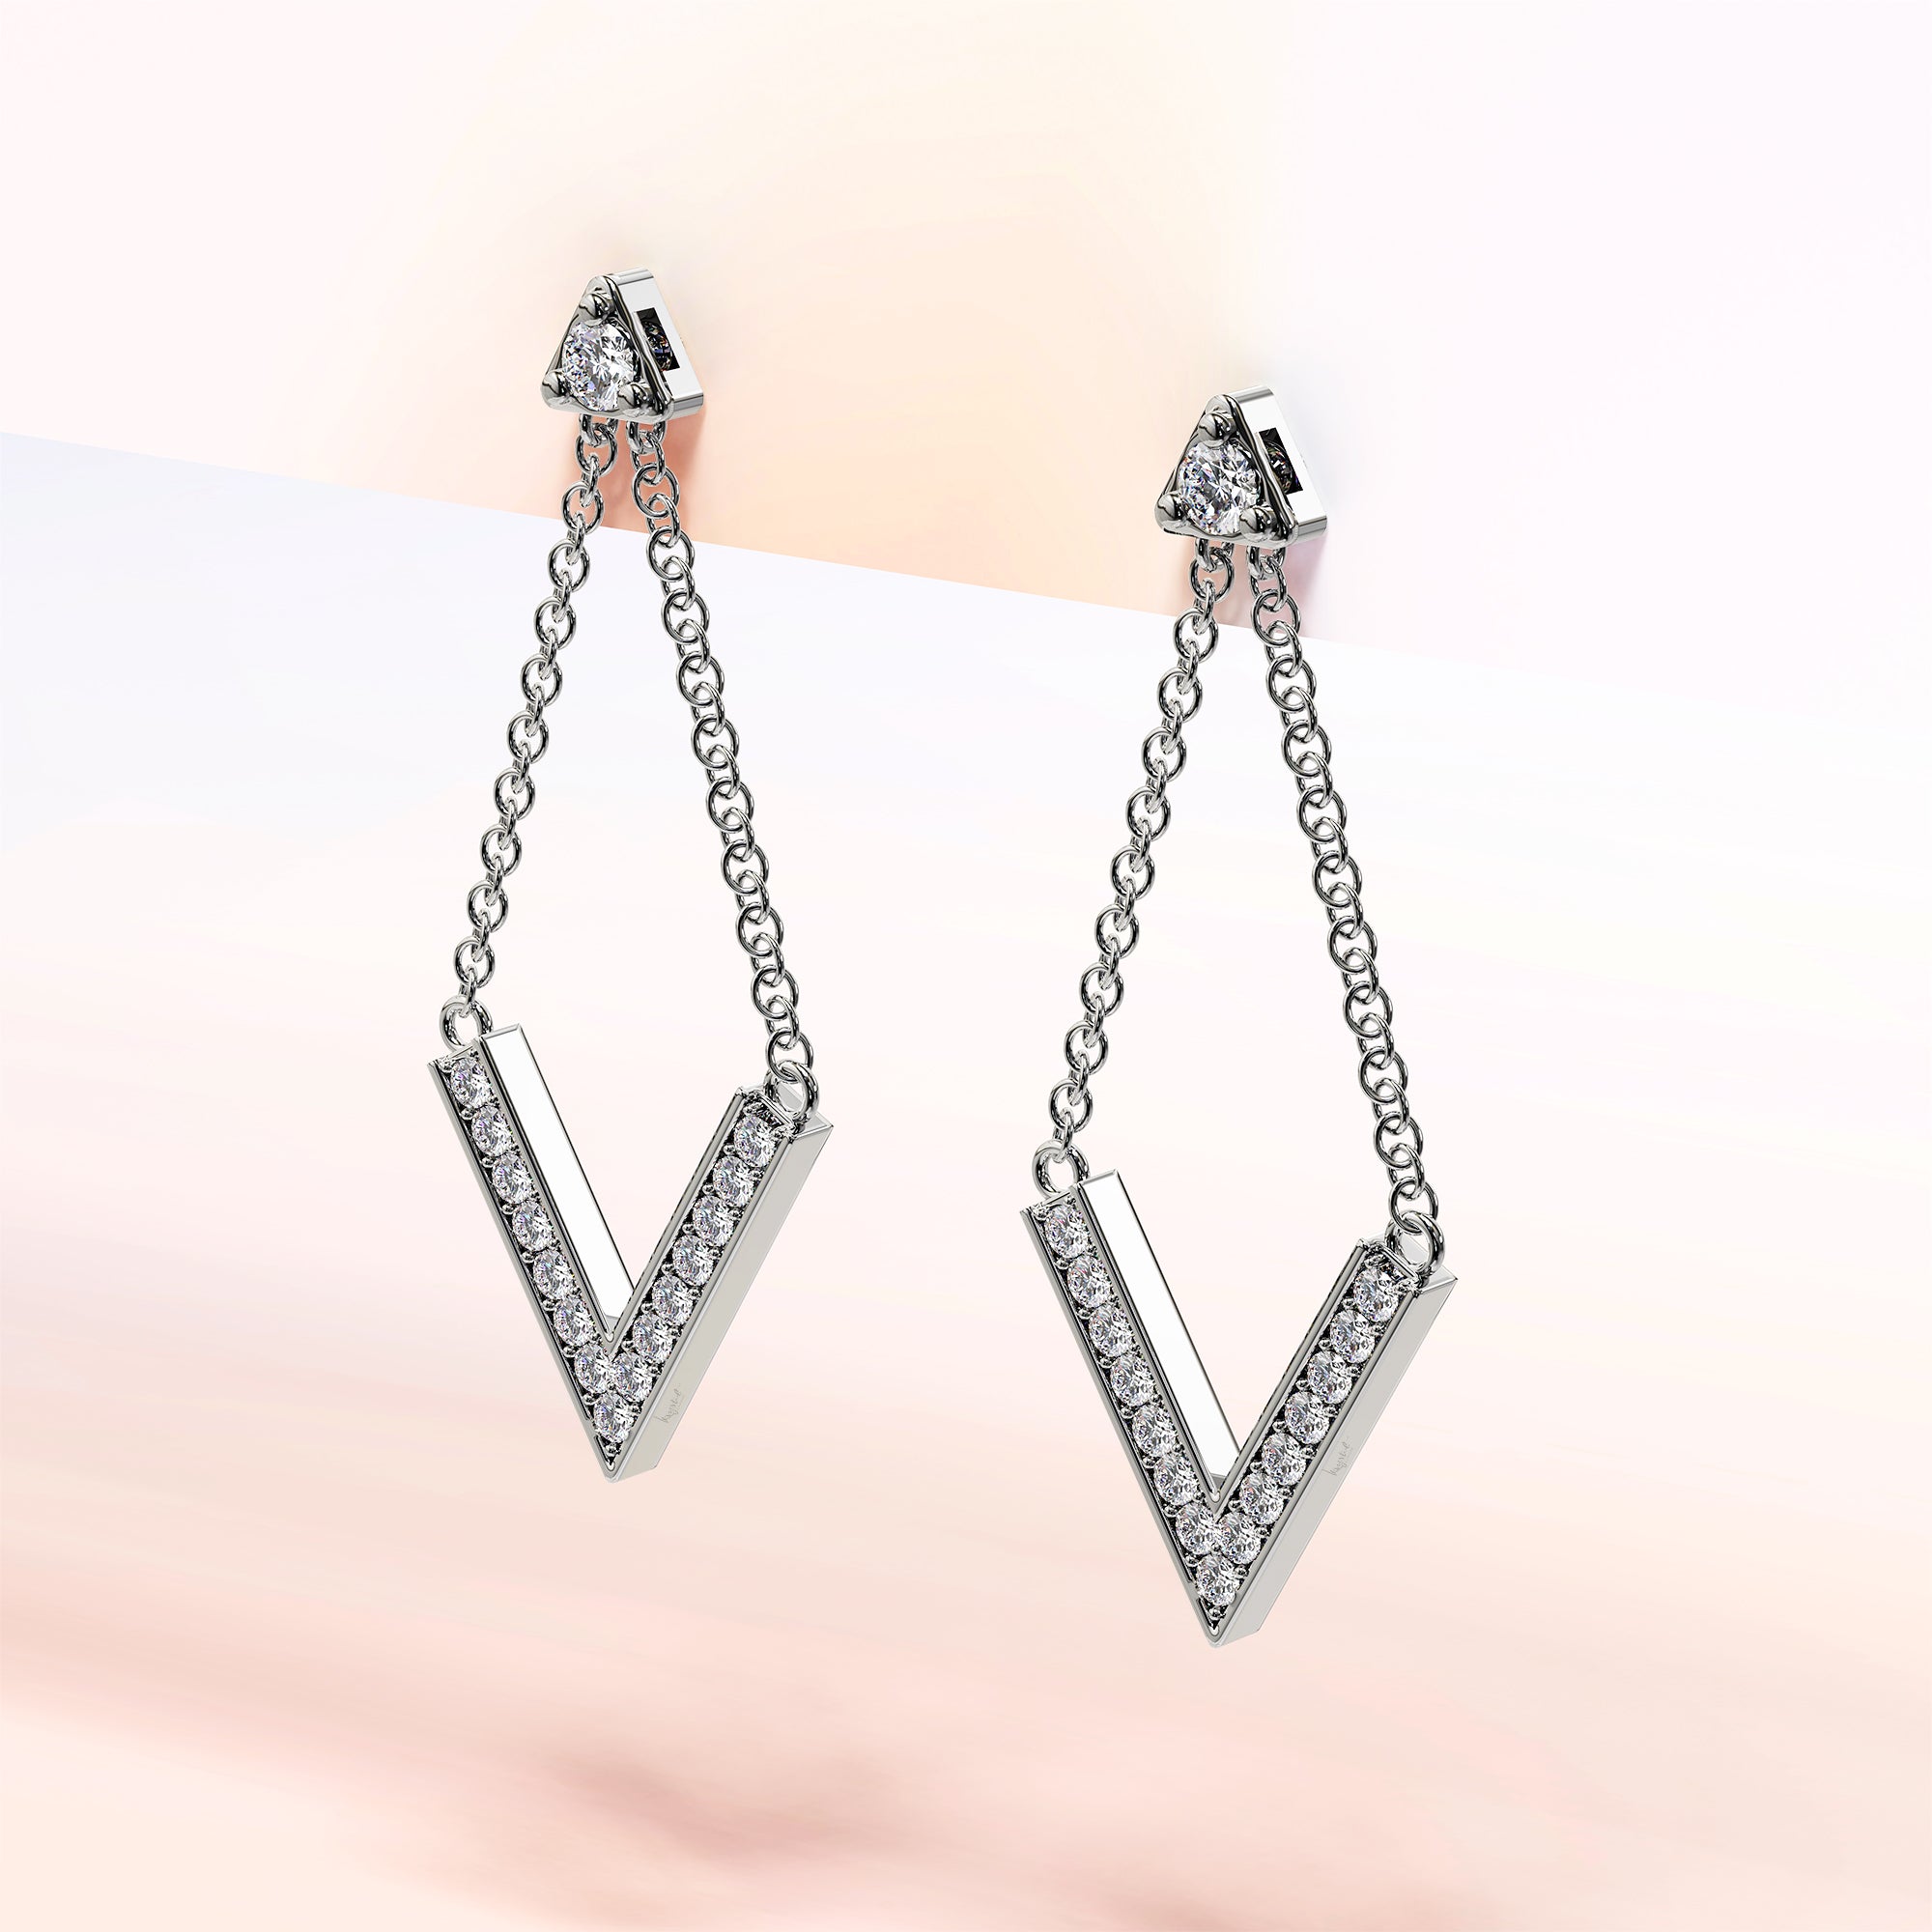 Luxury V Shaped Stud Earrings in White Gold Embellished With SWAROVSKI® Crystals